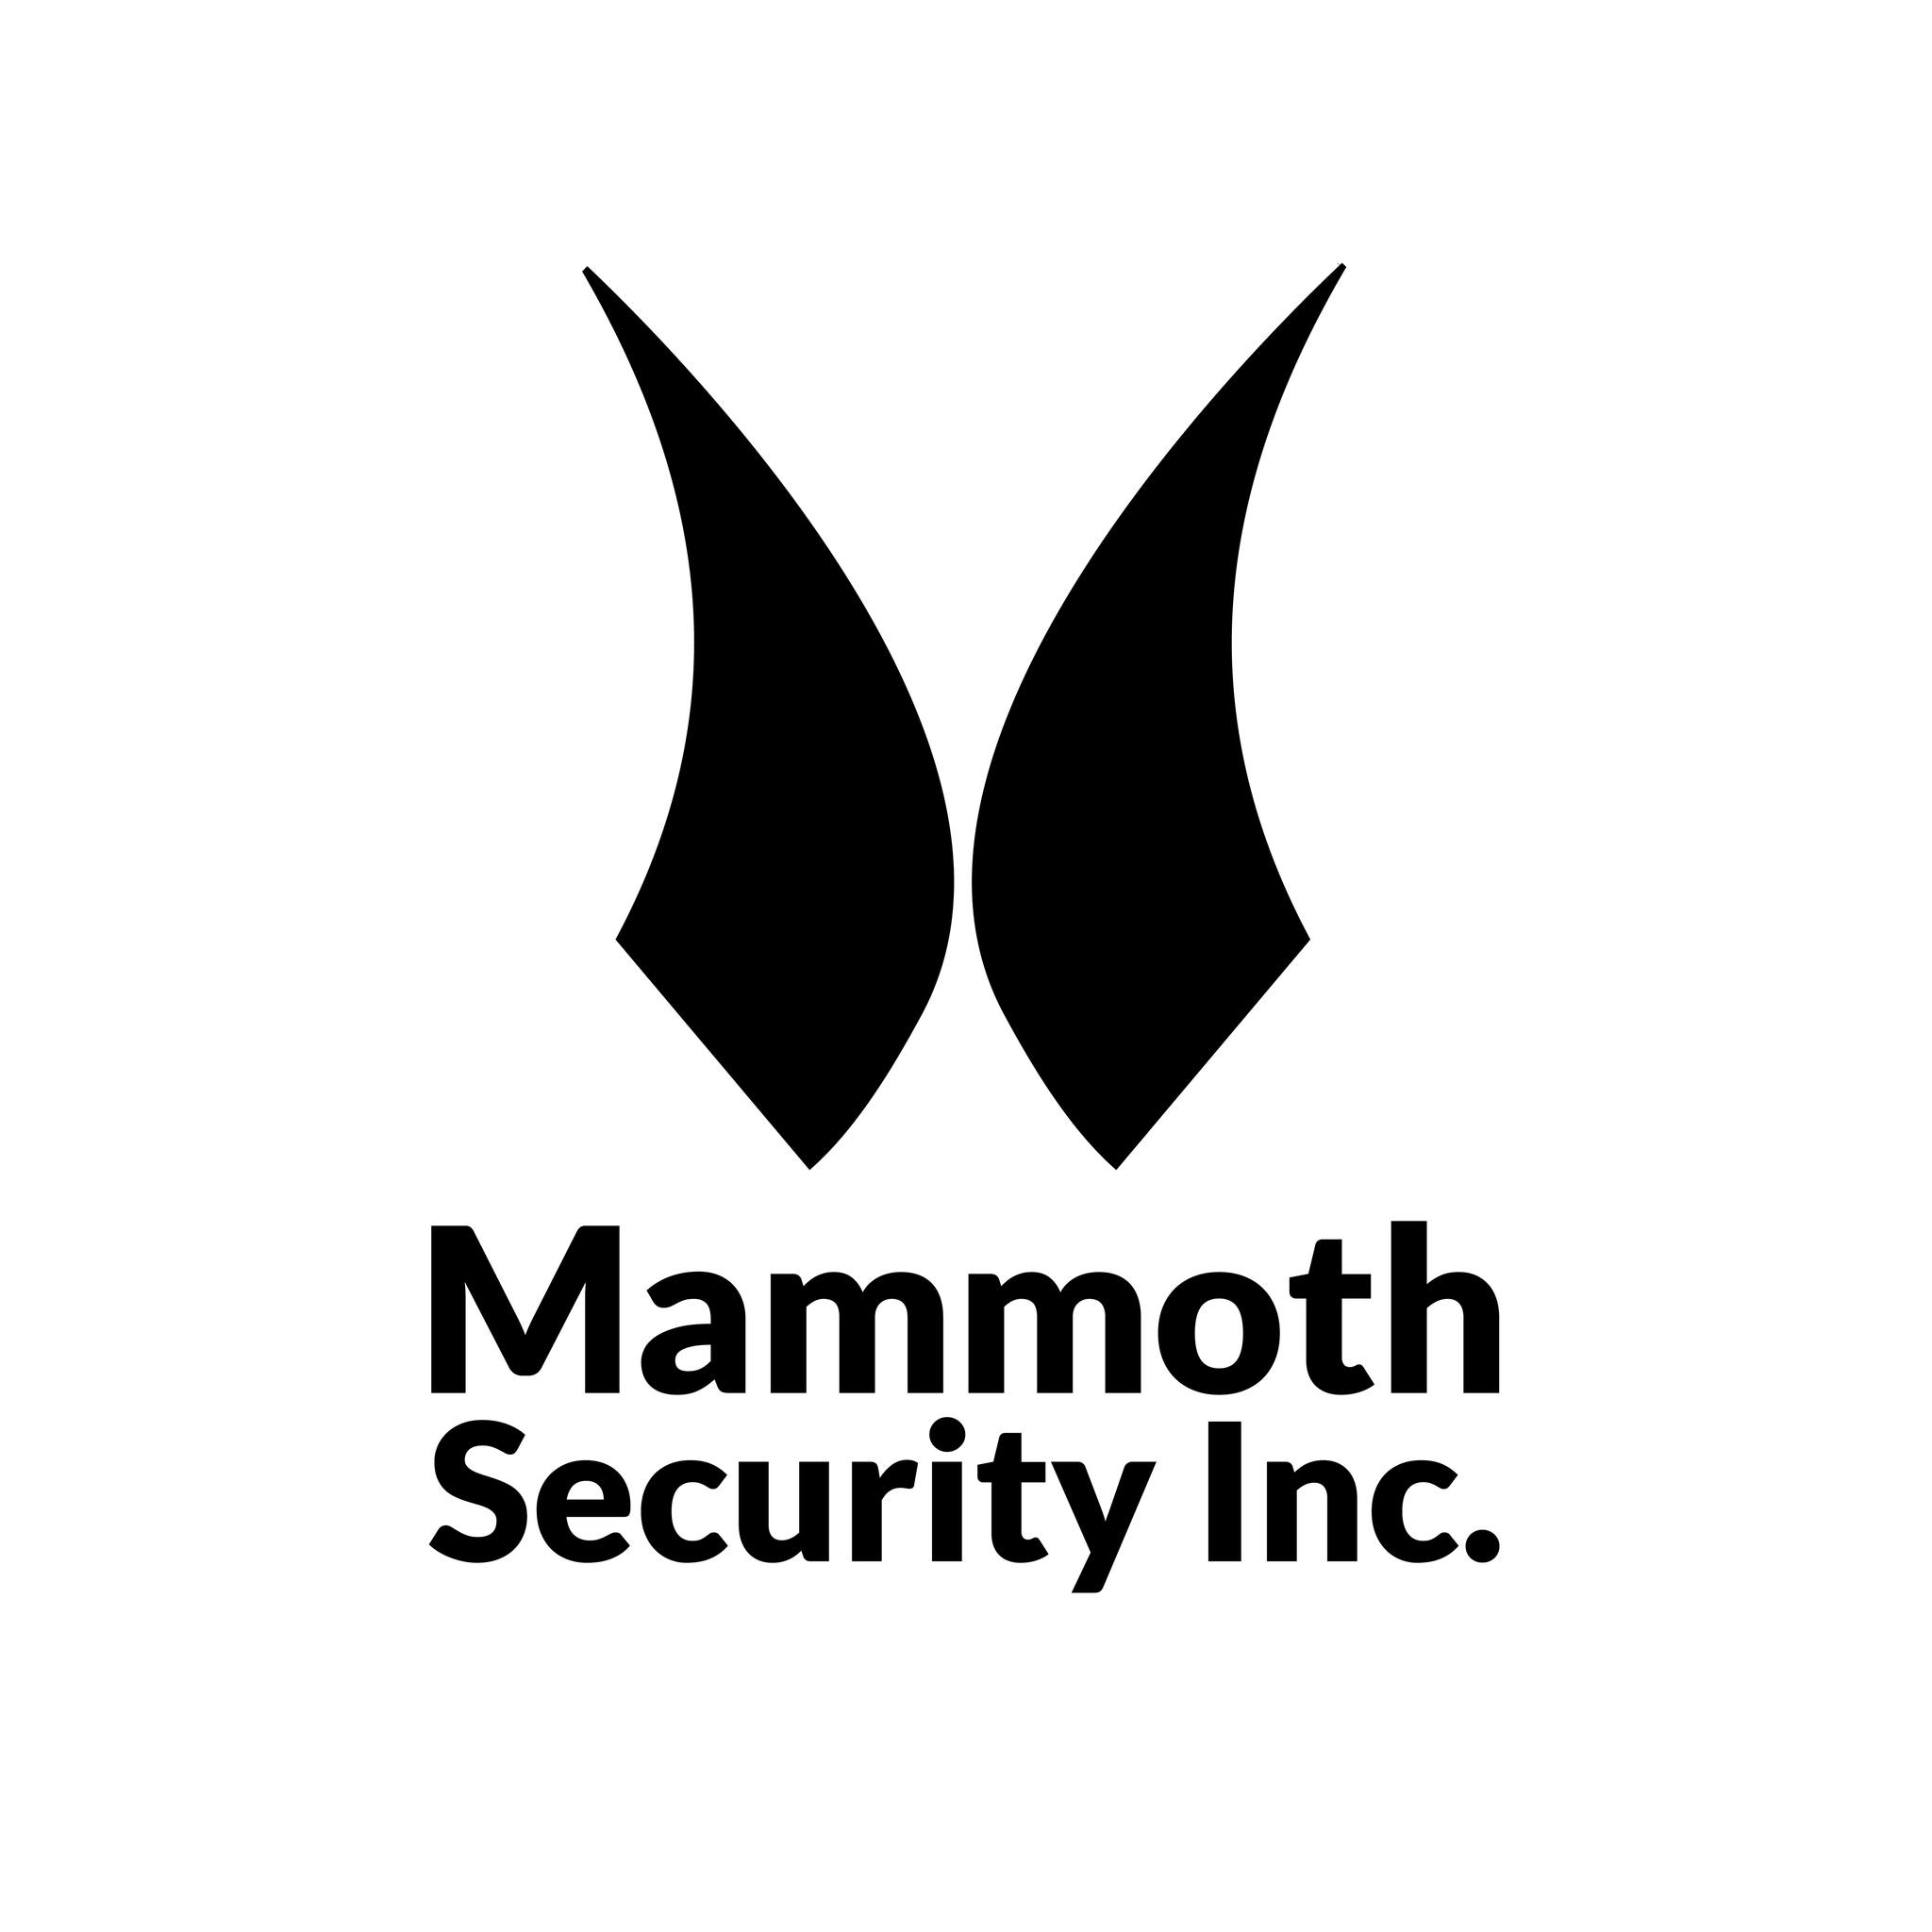 Mammoth Security Inc. Explains Why They are One of the Best Security System Installers